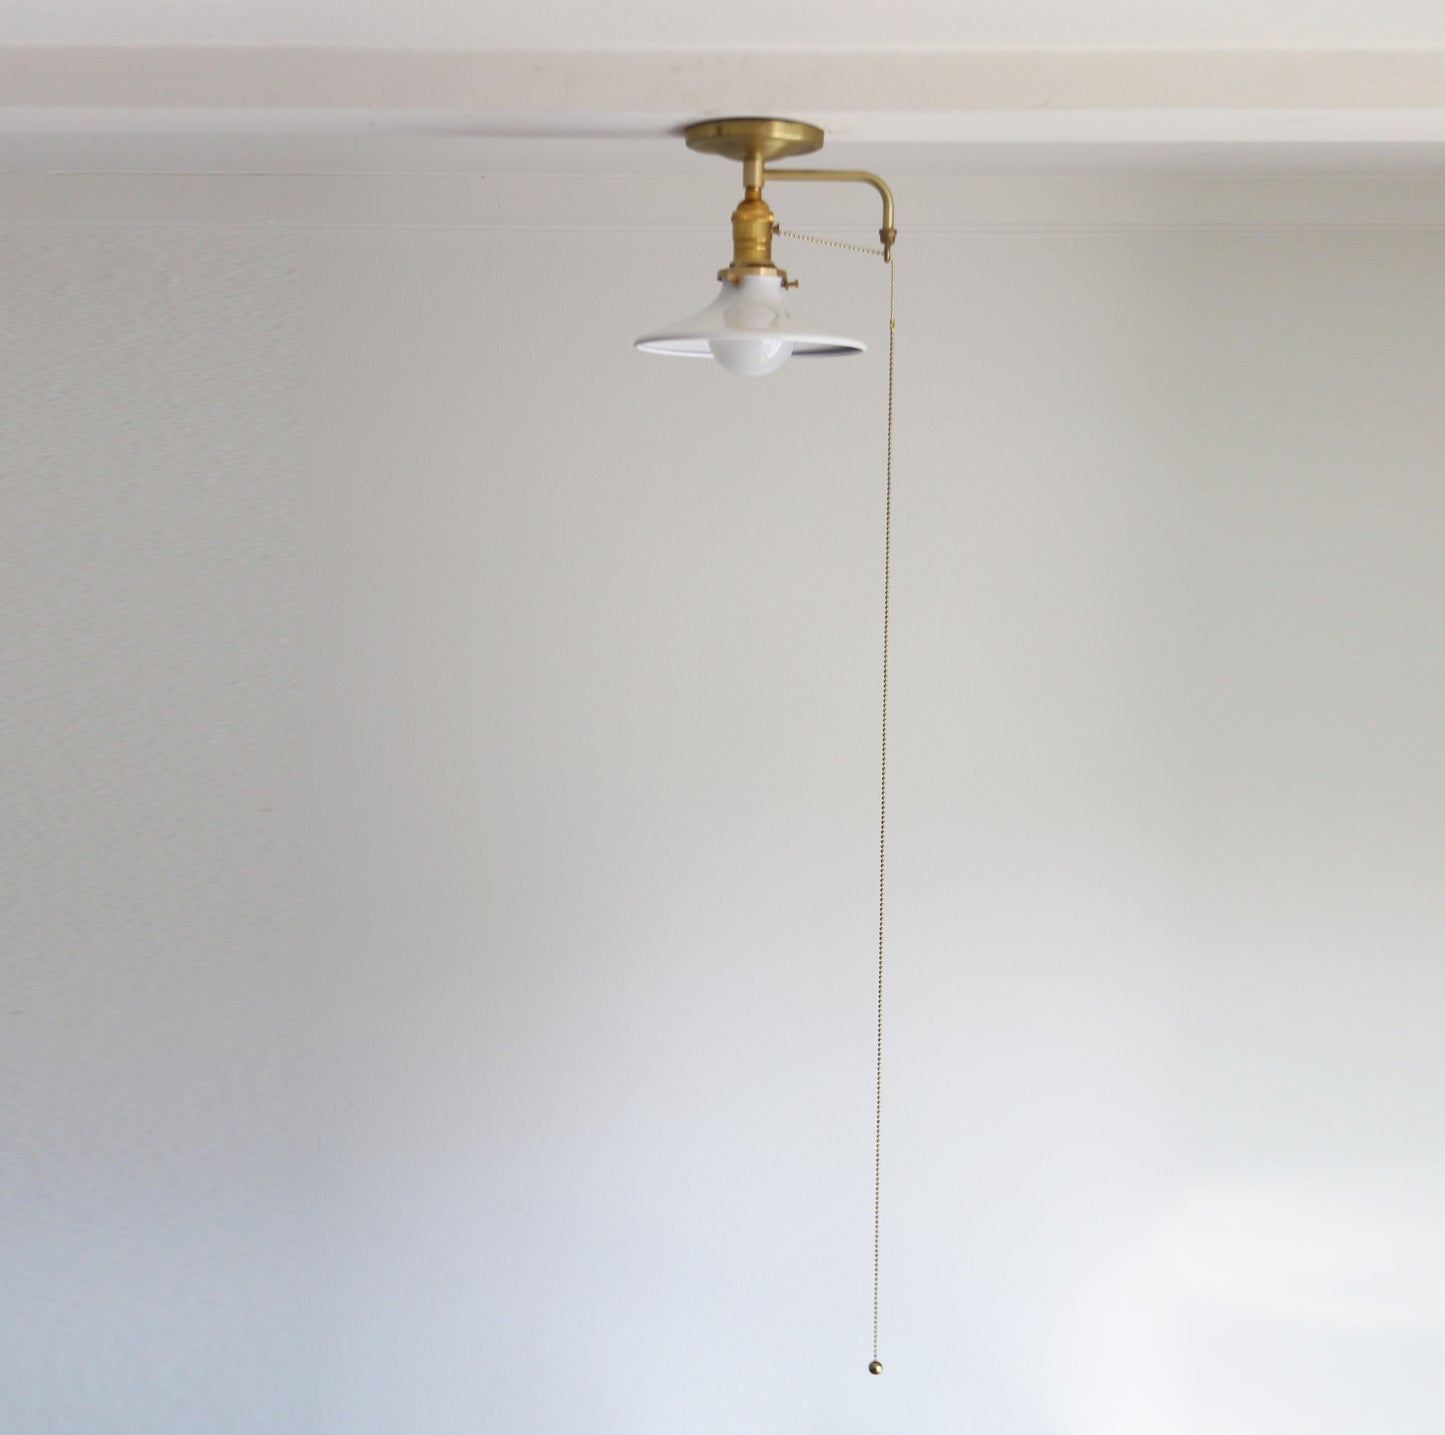 Ceiling light with pull chain switch, Casting brass canopy ceiling light